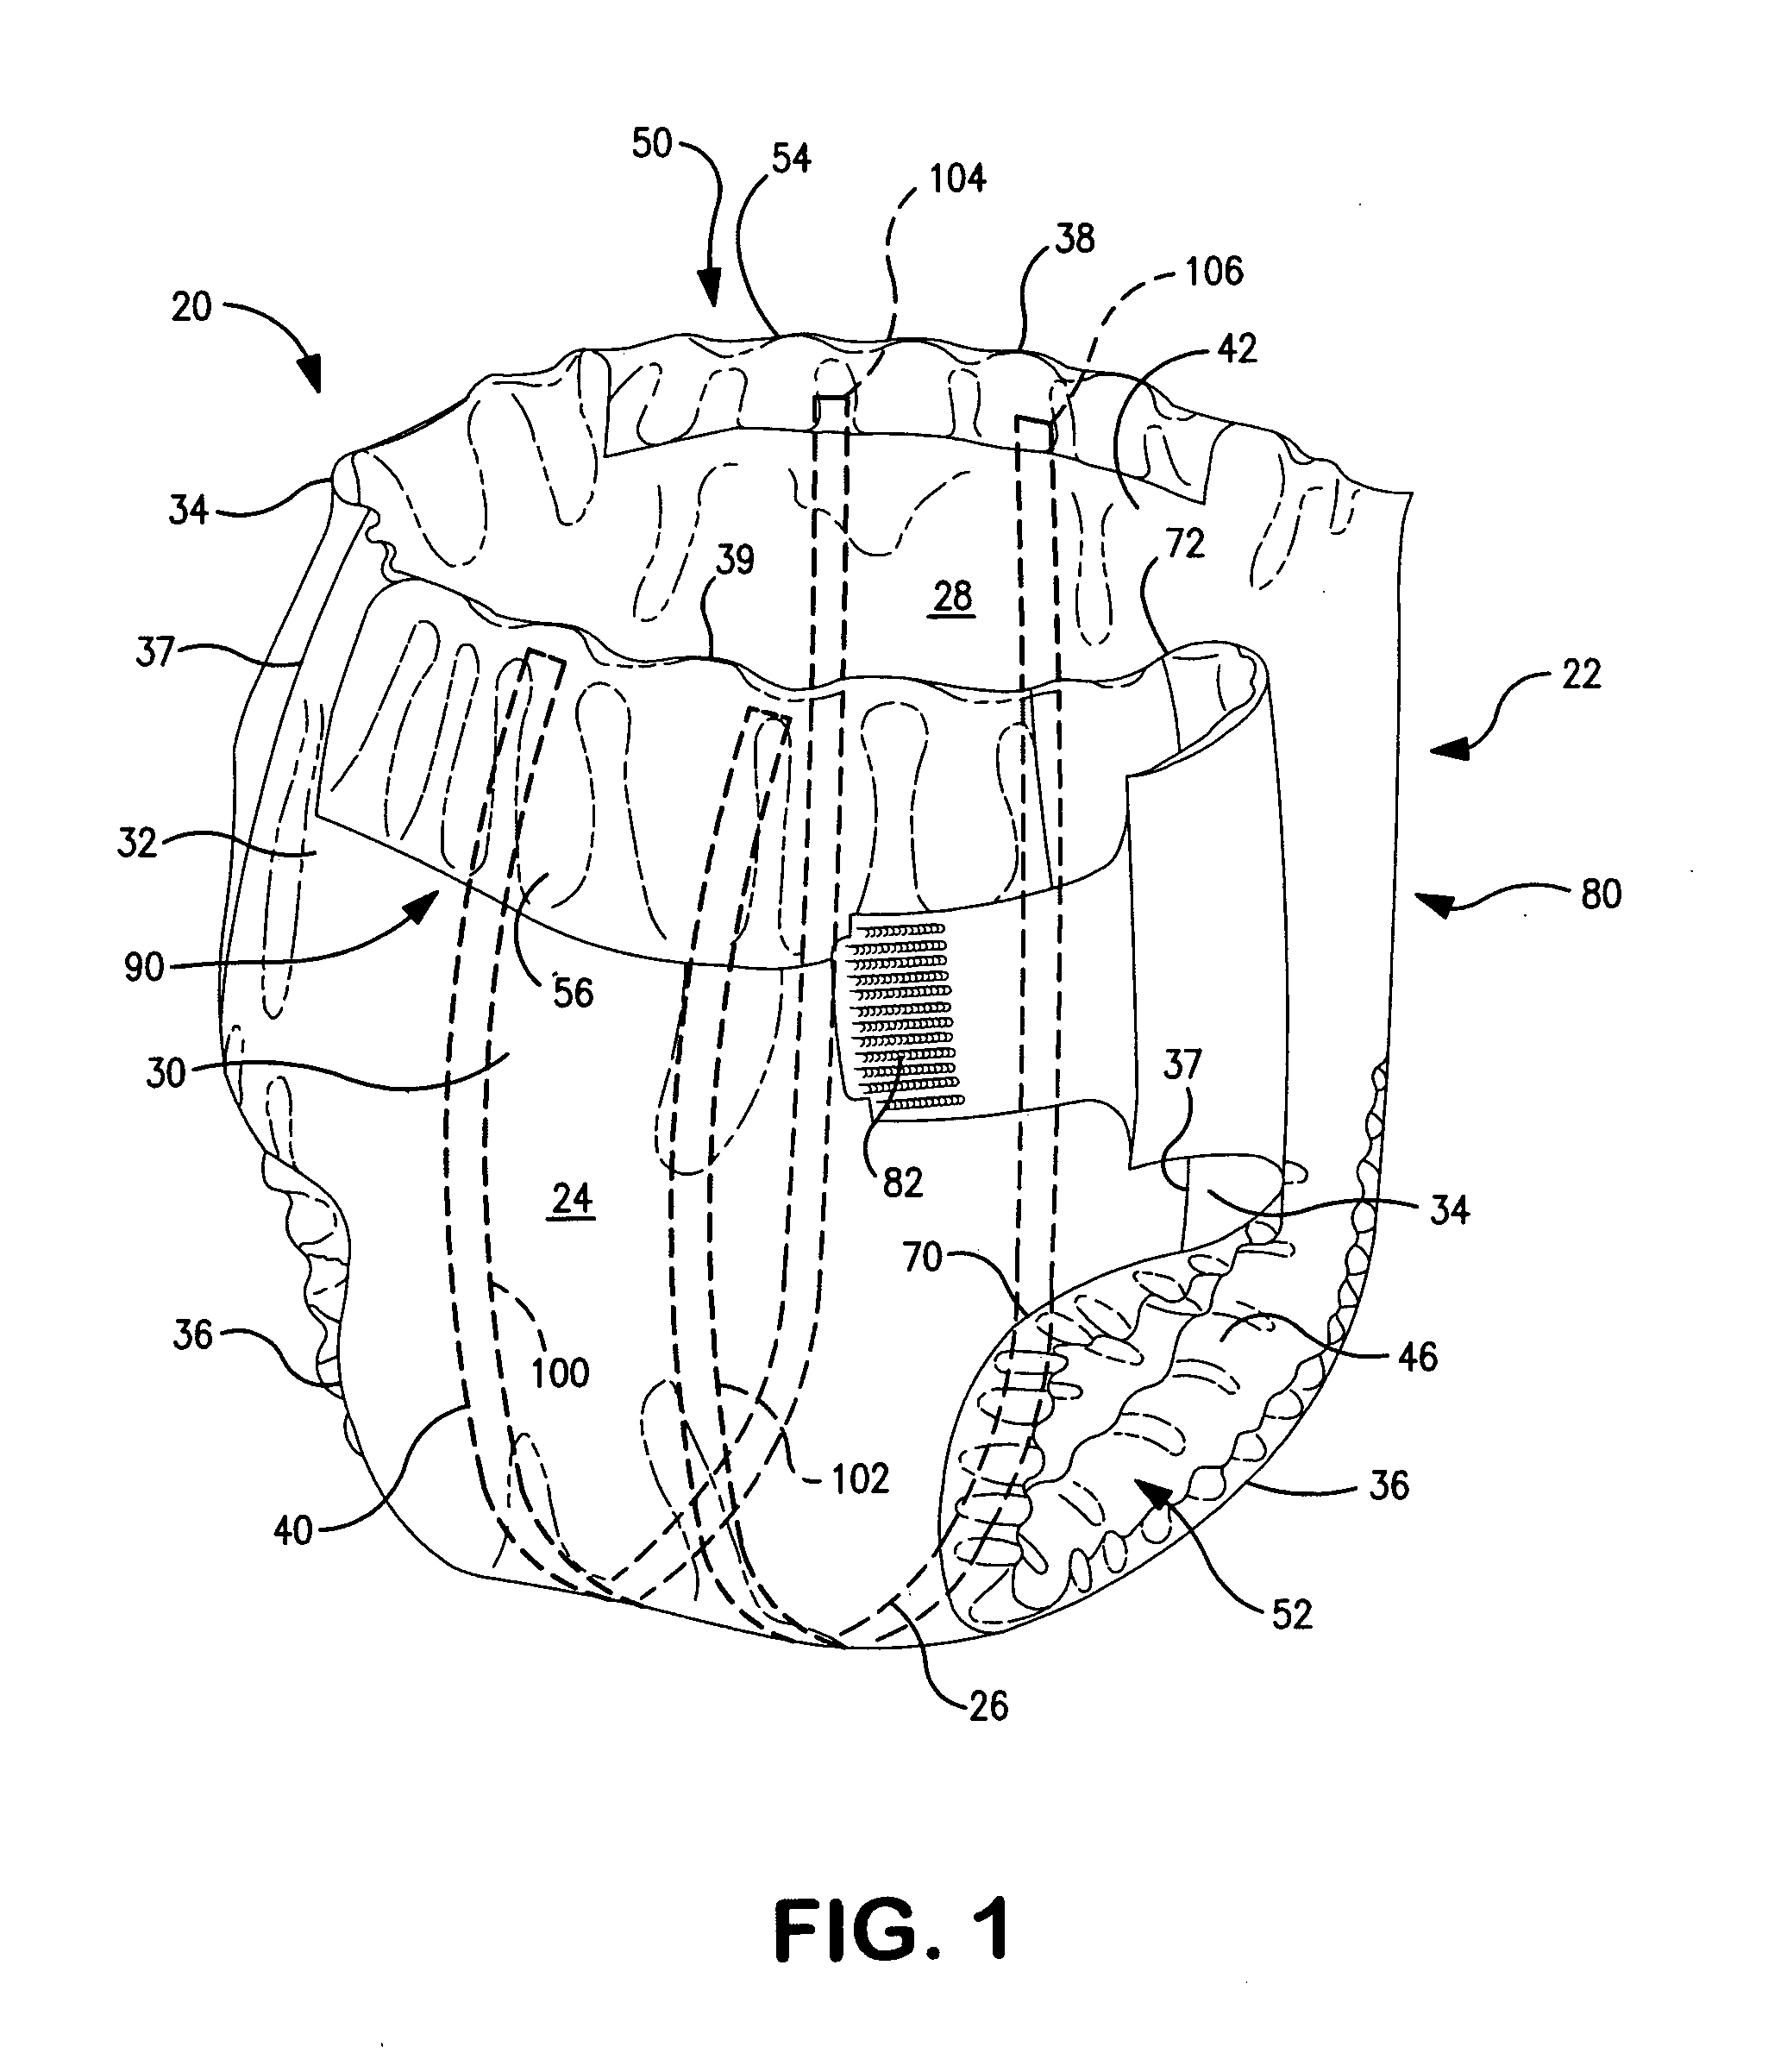 Process for producing and controlling the package quality of absorbent articles containing a wetness sensing system